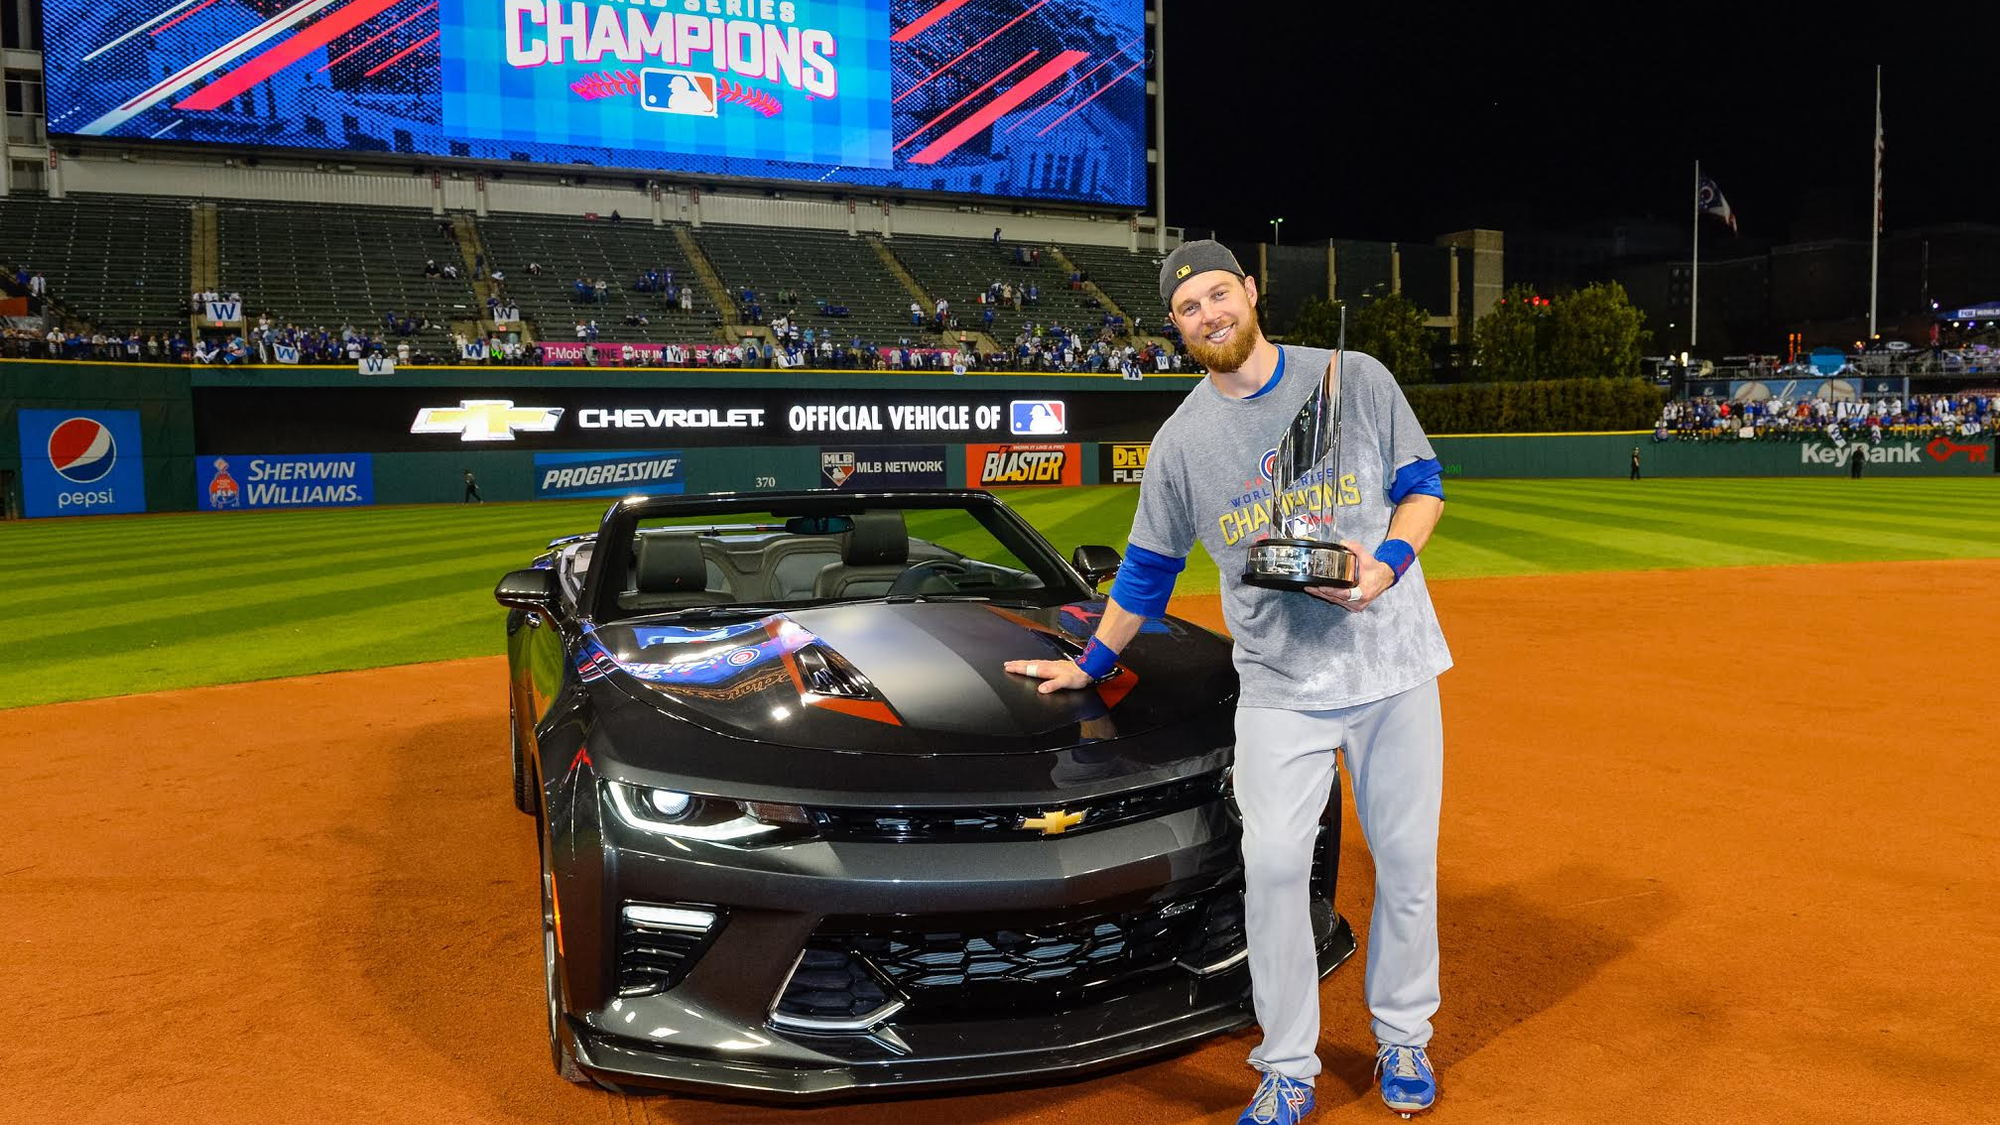 Chicago Cubs outfielder Ben Zobrist wins Camaro SS for earning MVP nod